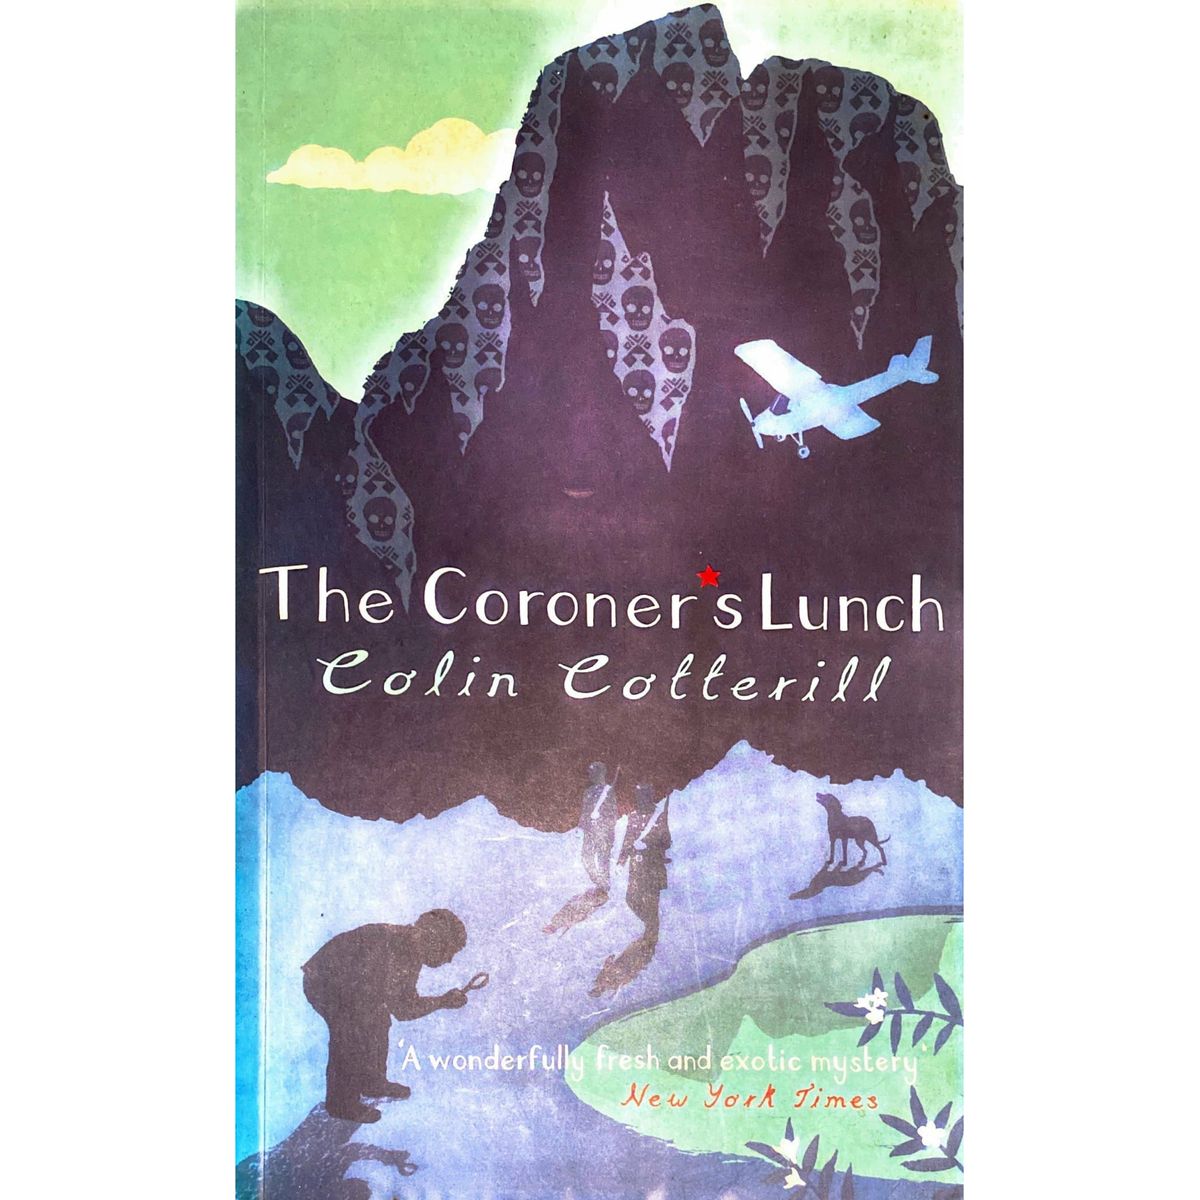 ISBN: 9781847240705 / 1847240704 - The Coroner's Lunch by Colin Cotterill [2007]